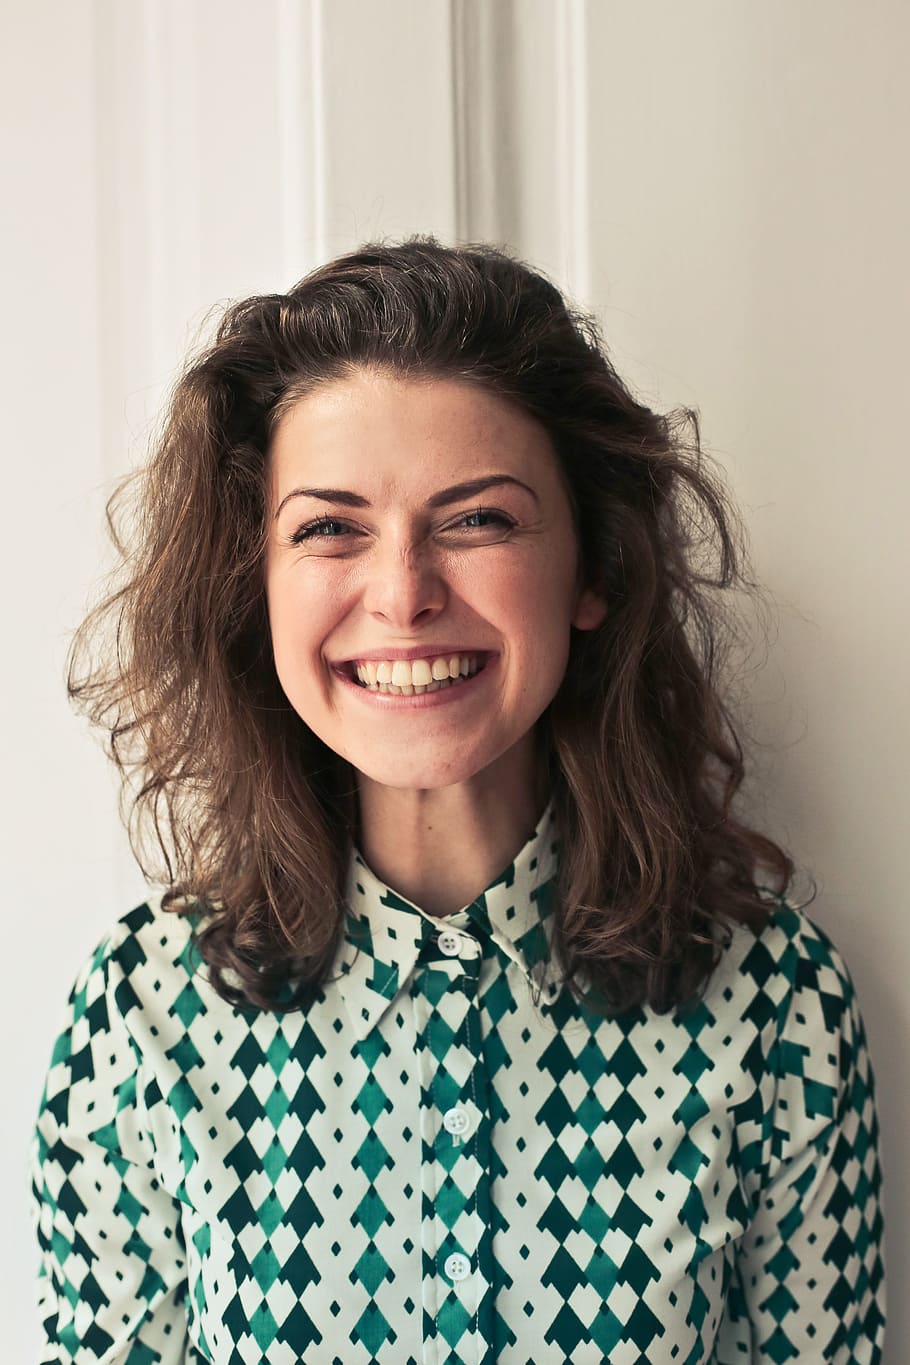 Portrait Of Young woman in printed collared shirt seen smiling as looking at camera